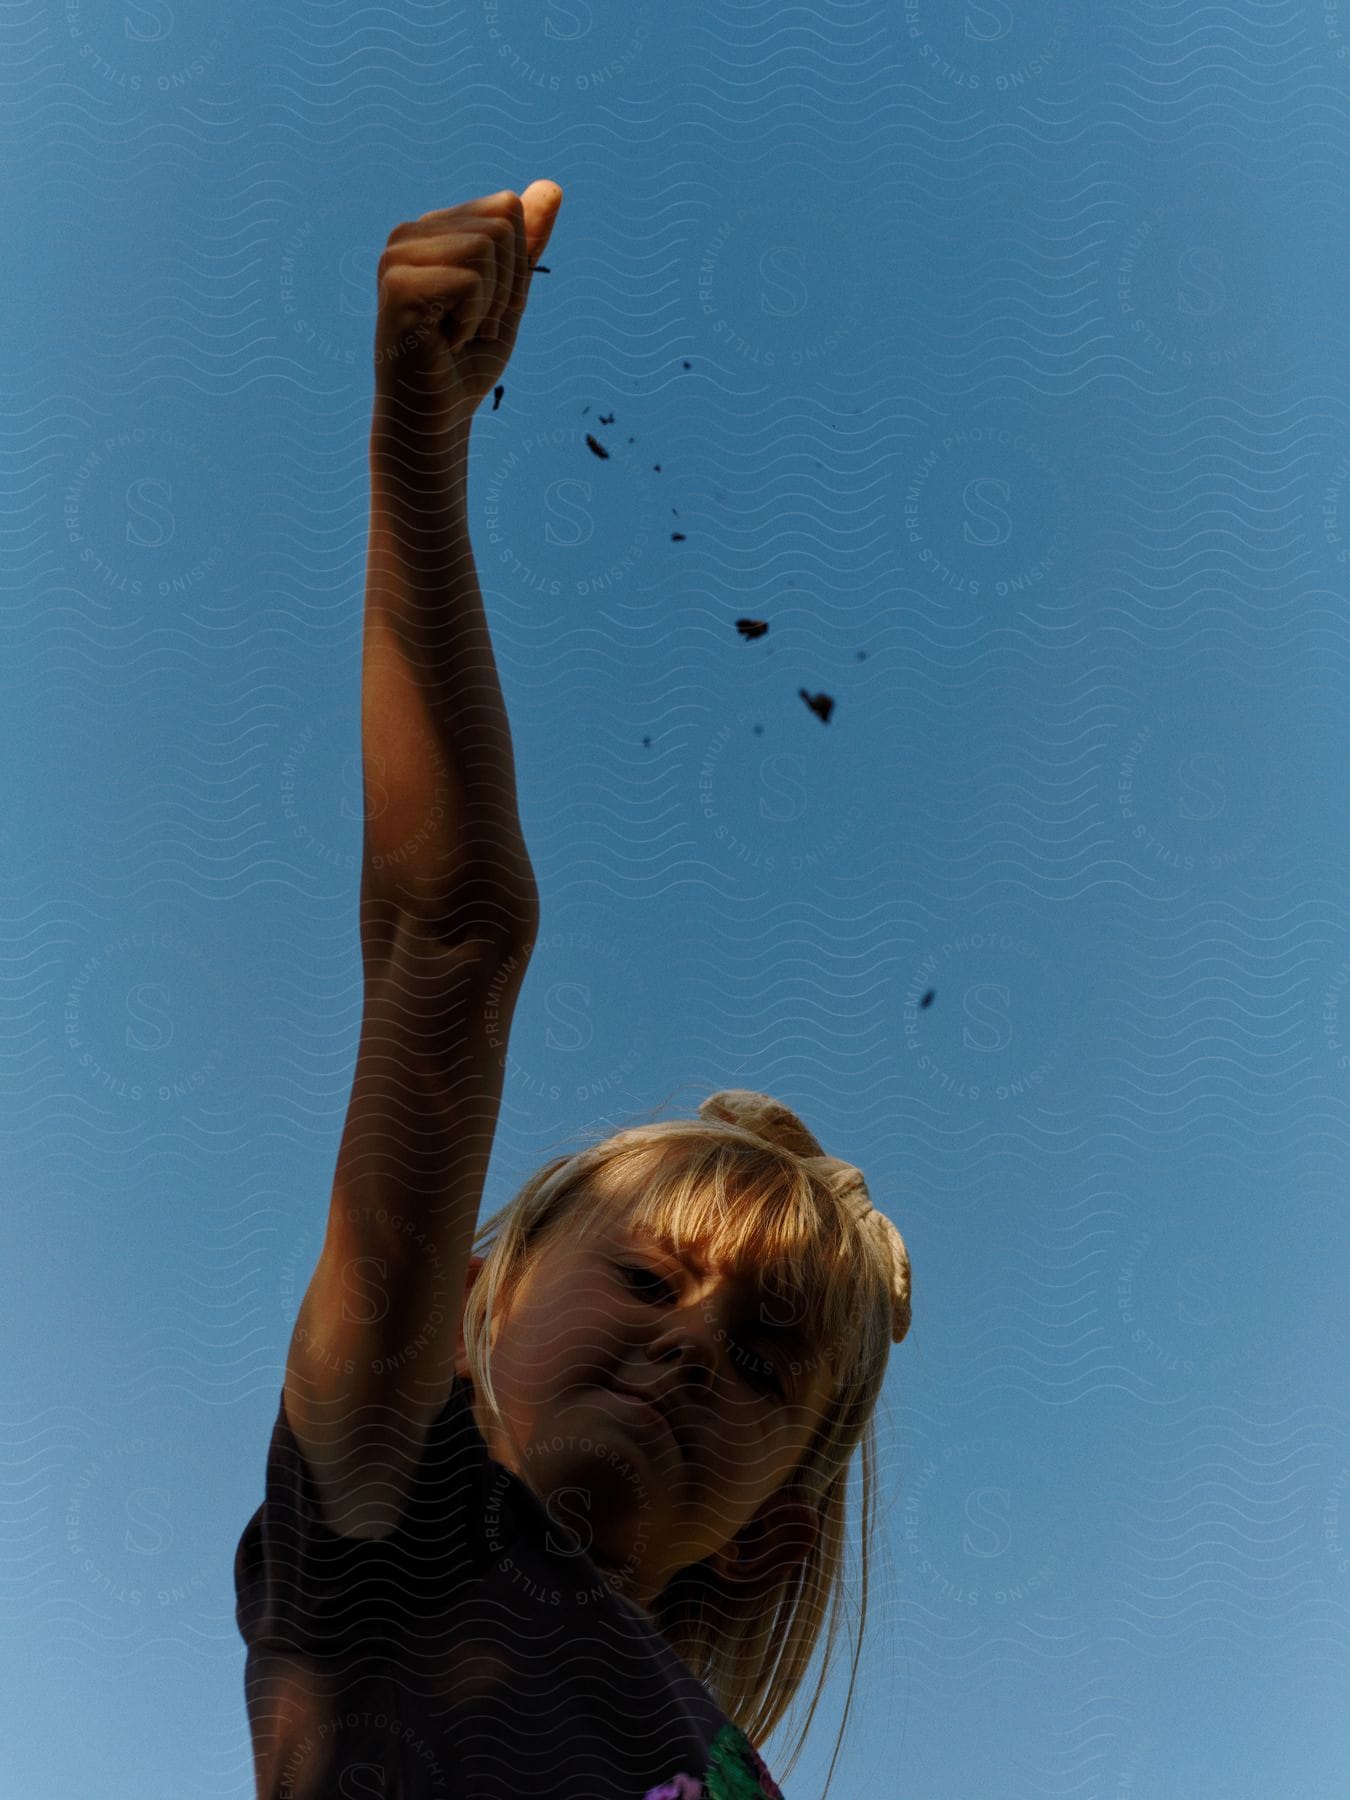 A determined girl raises her arm in the sky with a clenched fist